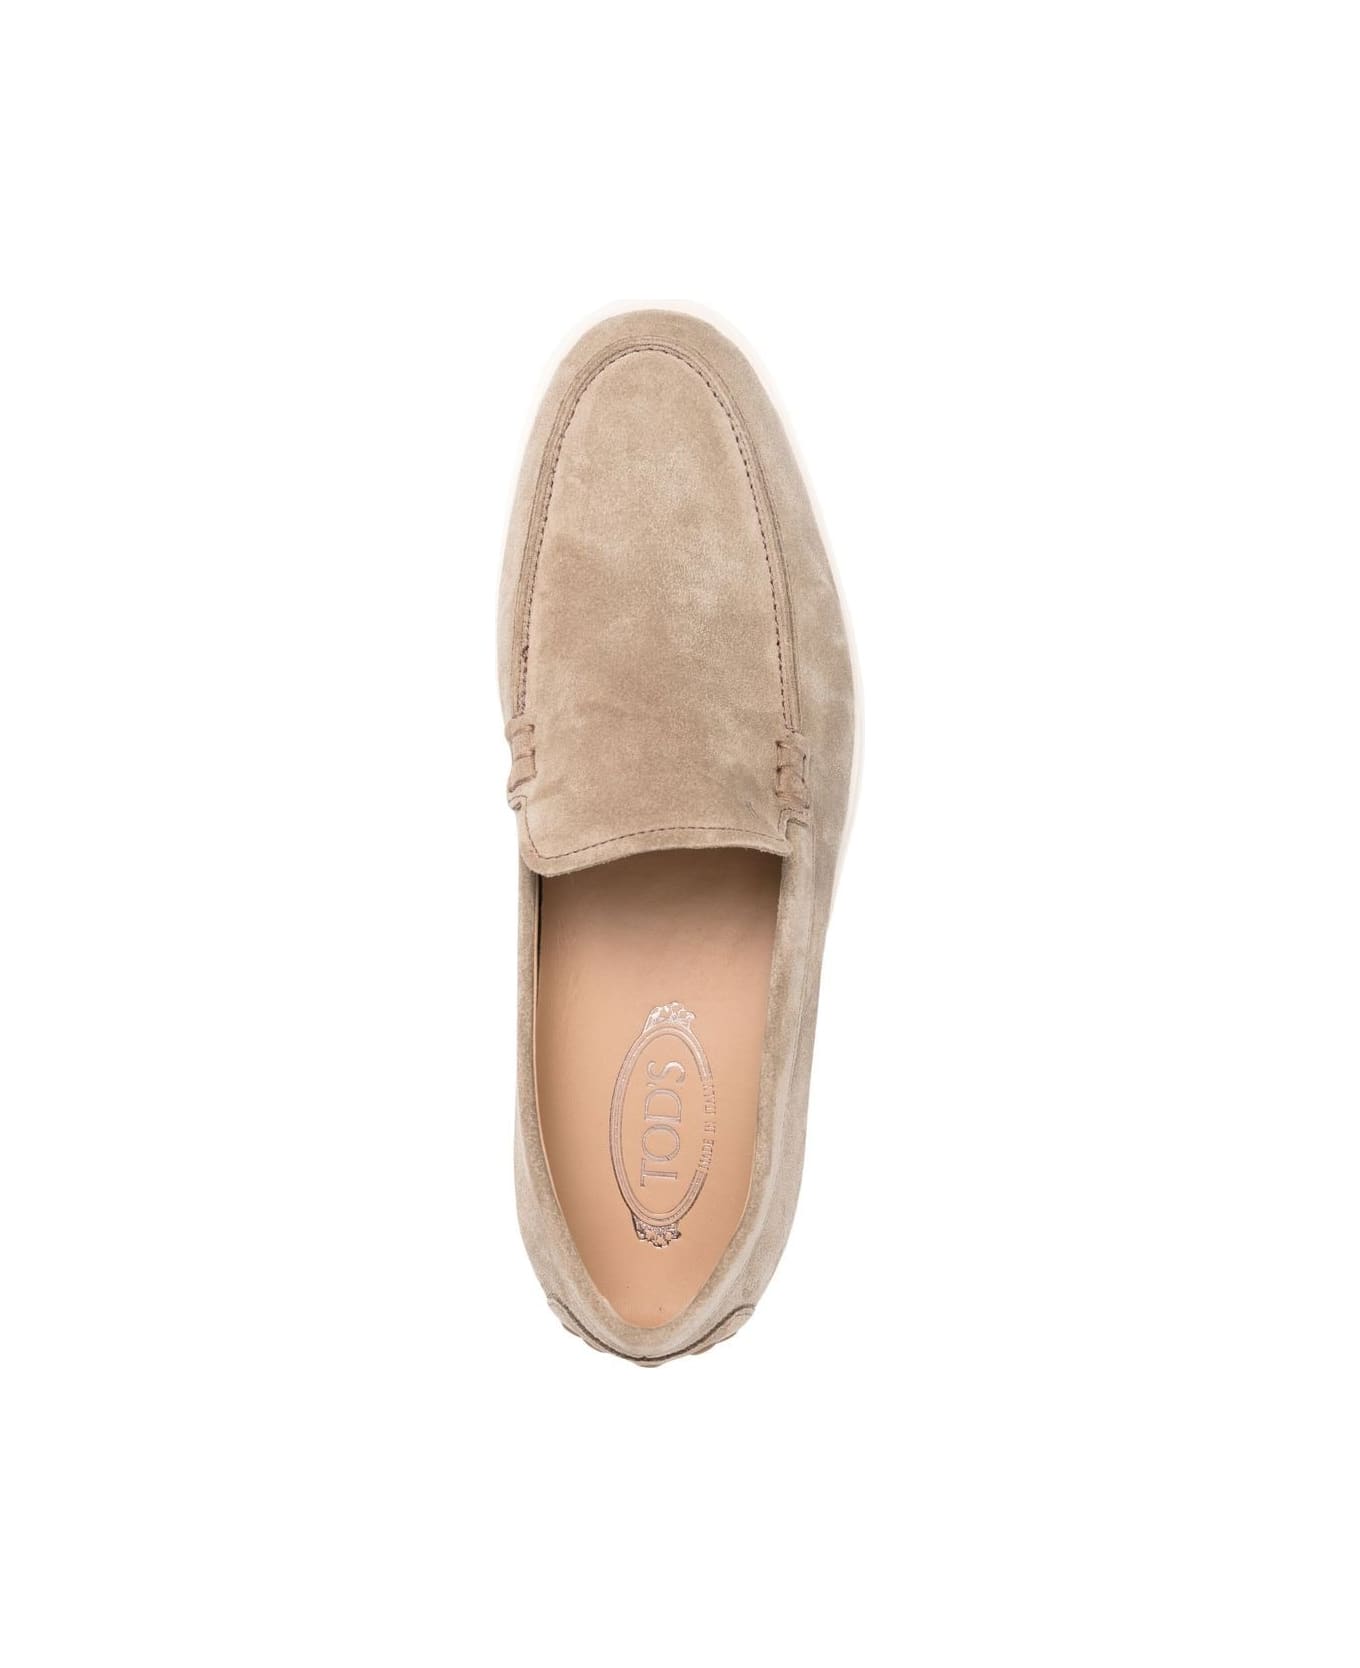 Tod's Suede Slipper Moccasin - Peat